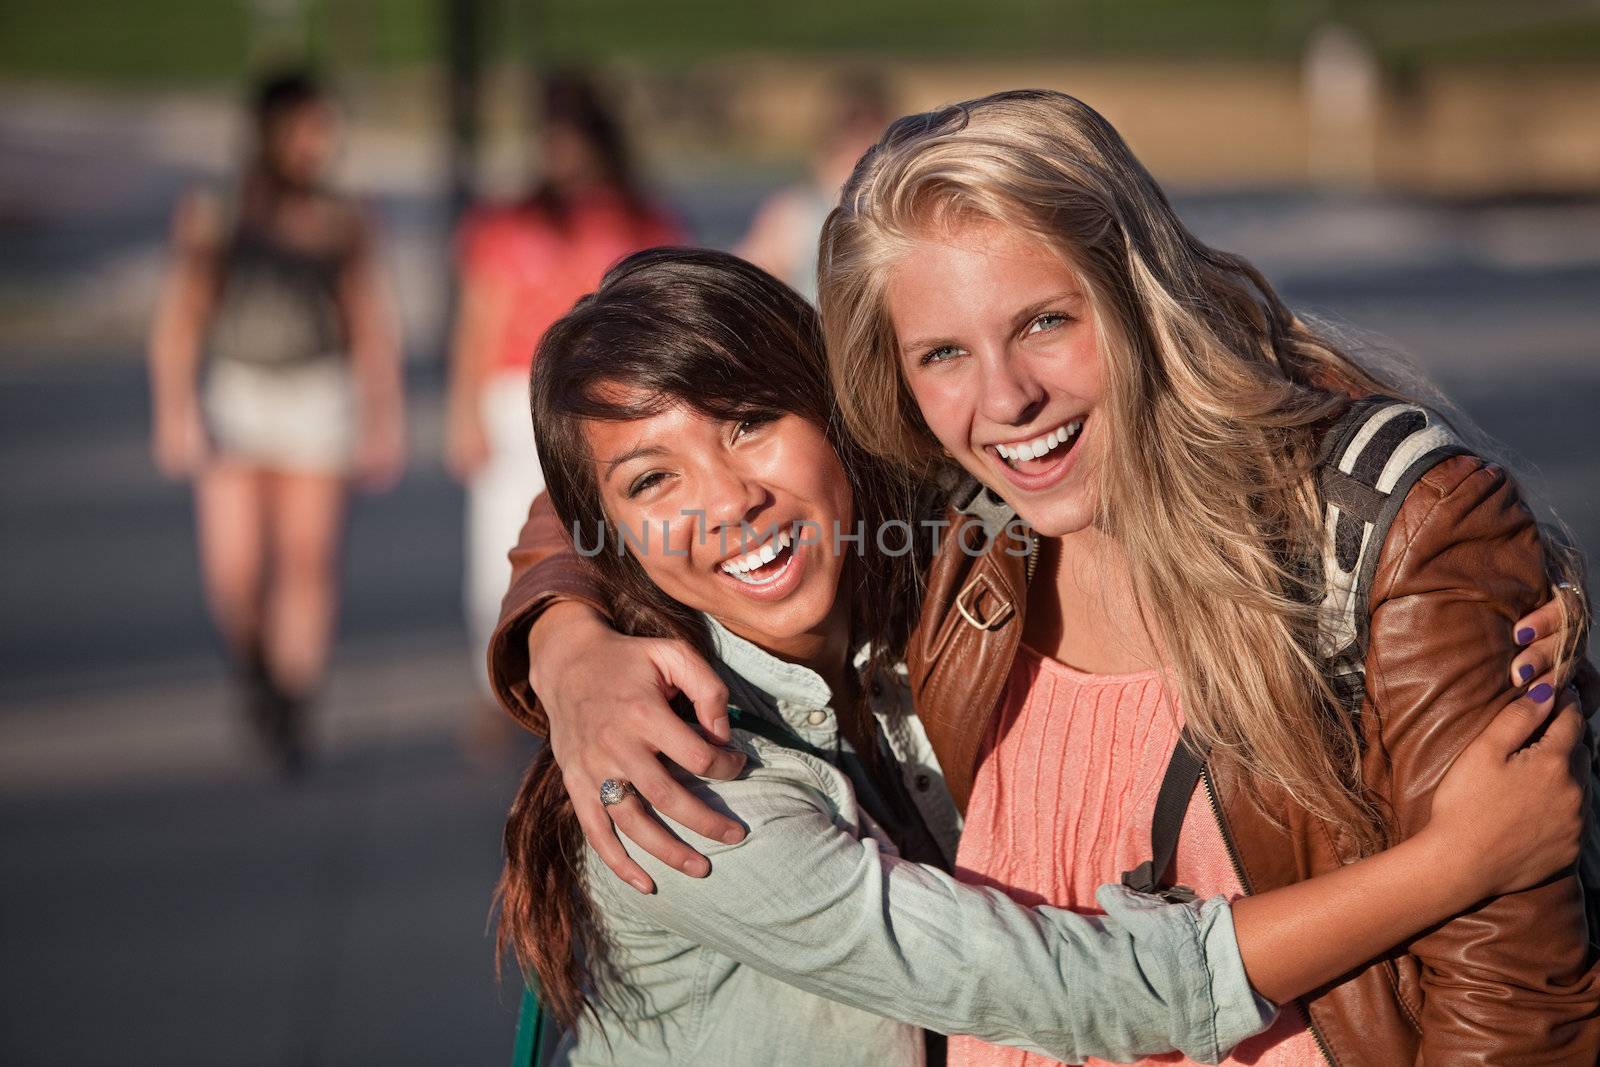 Two laughing female students hugging each other outdoors